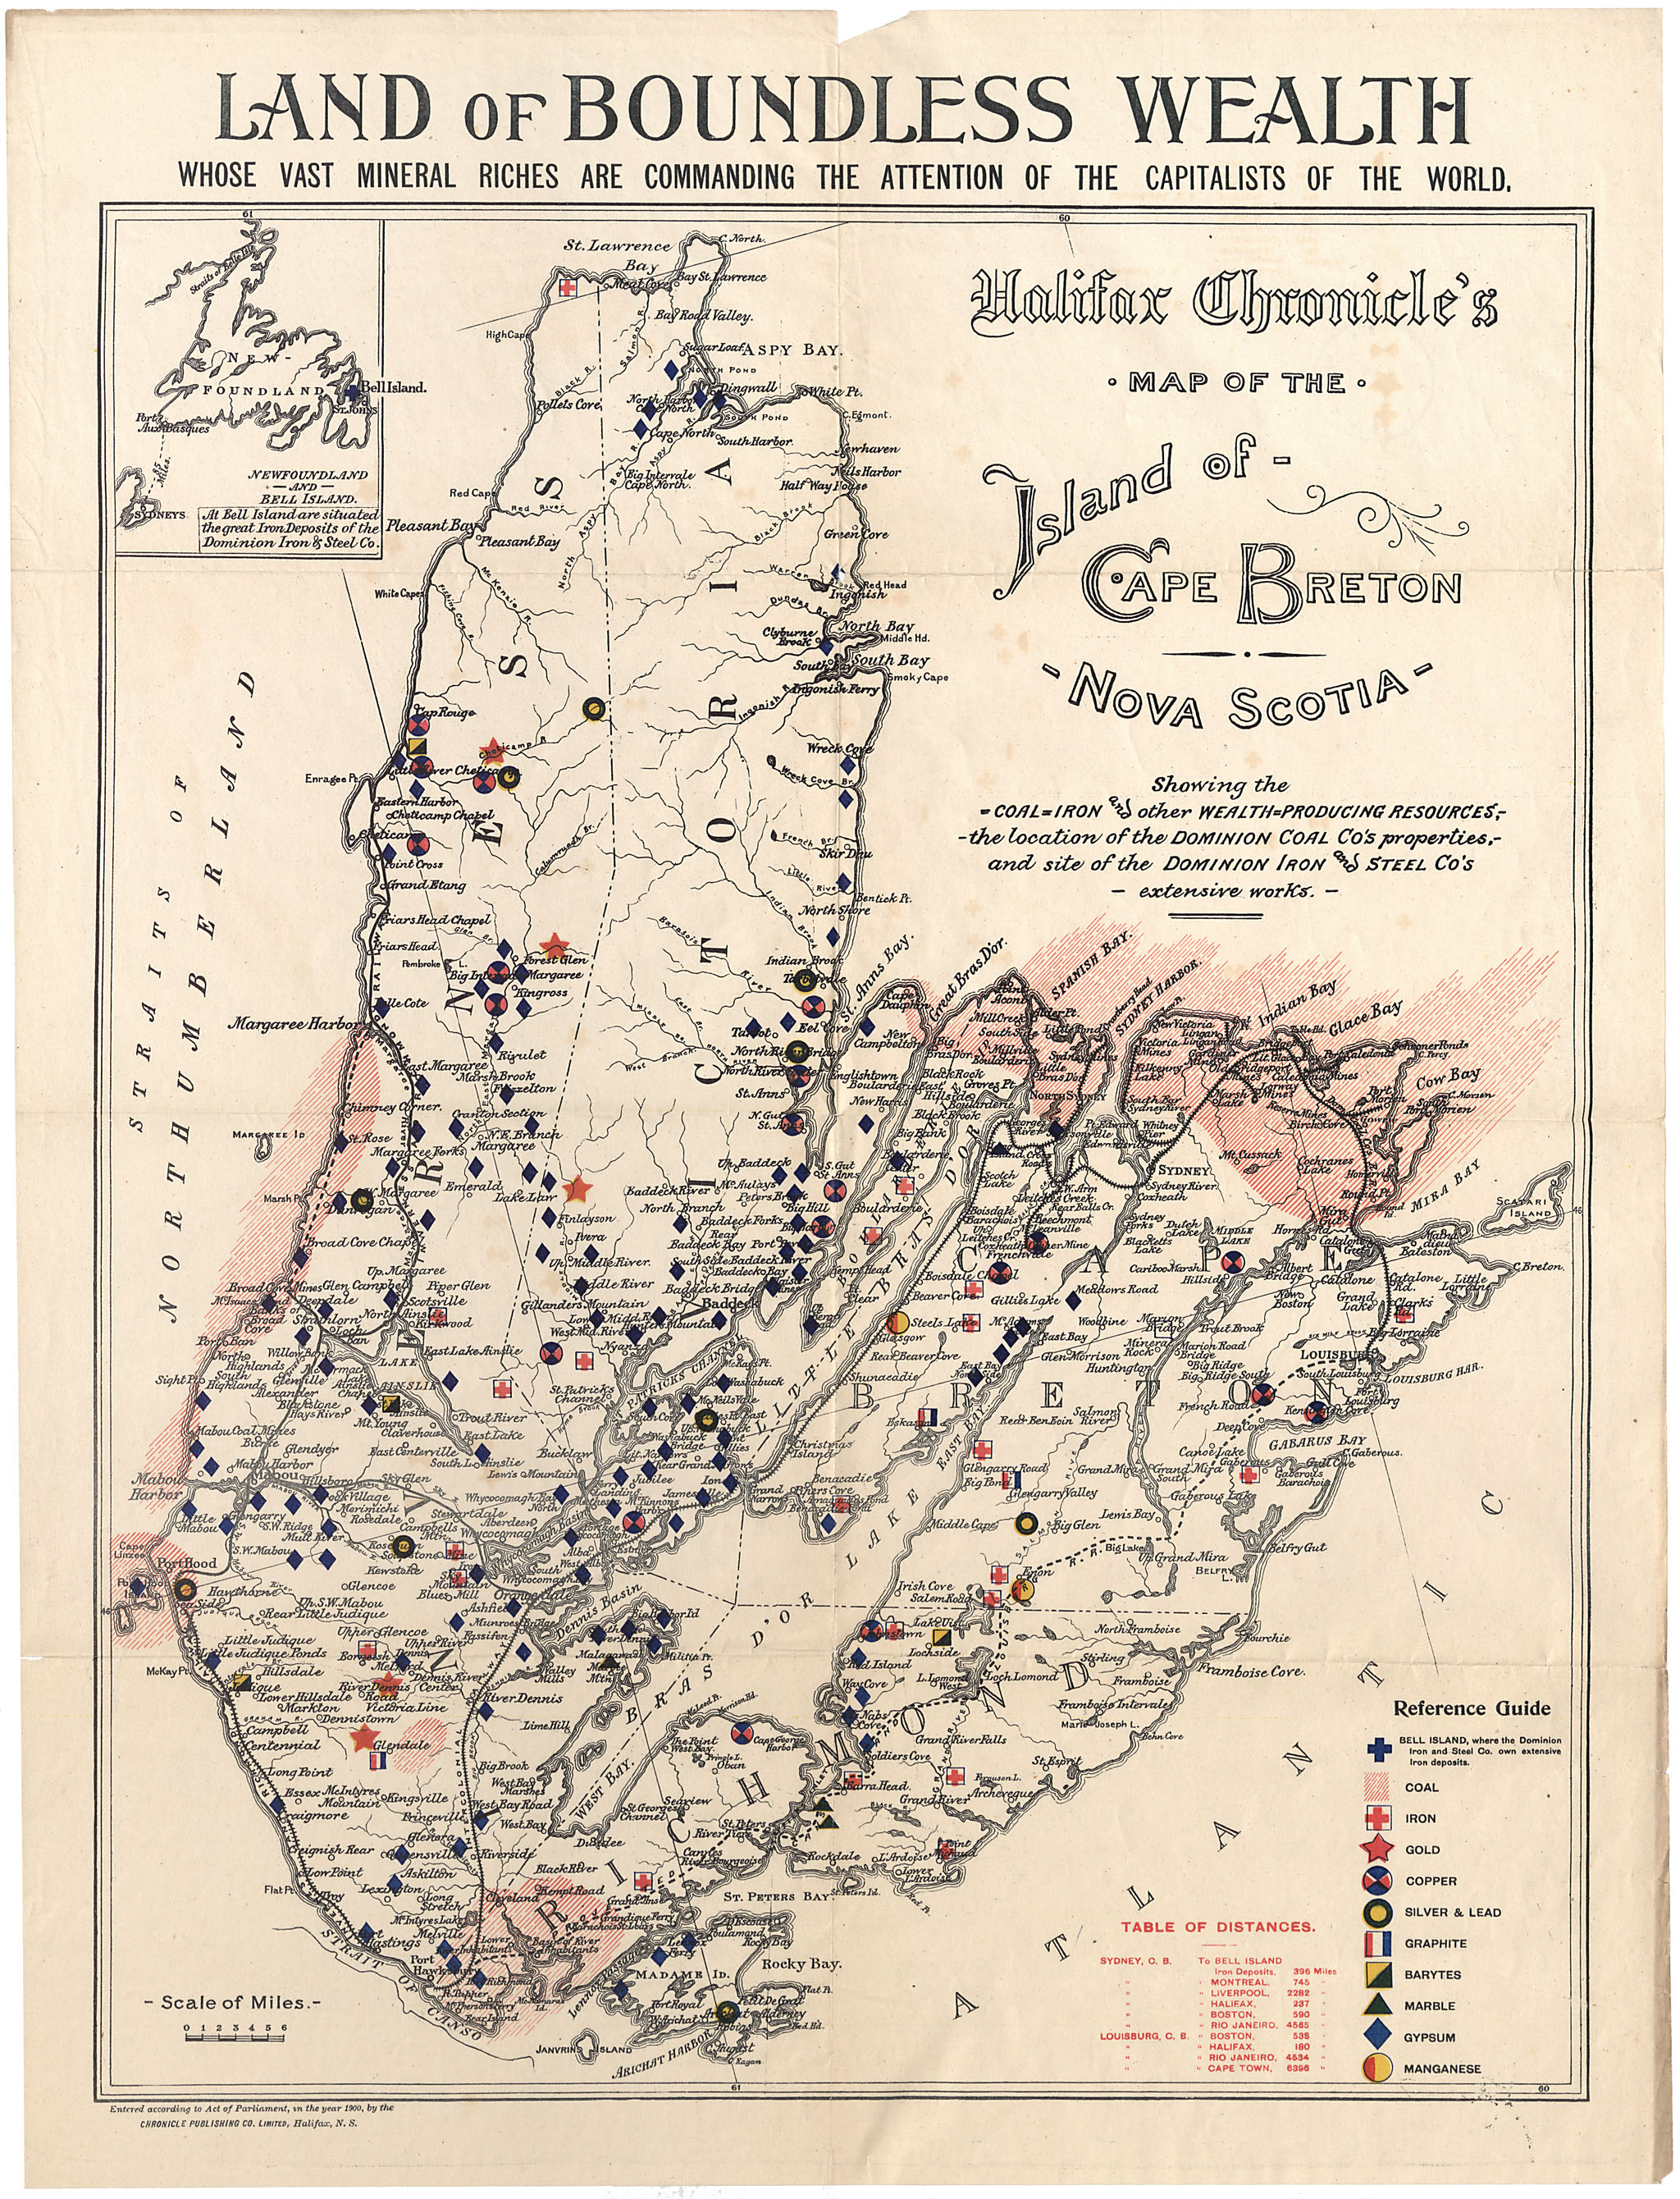 Image shows a historical map of Cape Breton Island from circa 1900, including locations of different minerals. The map is titled "Land of Boundless Wealth".